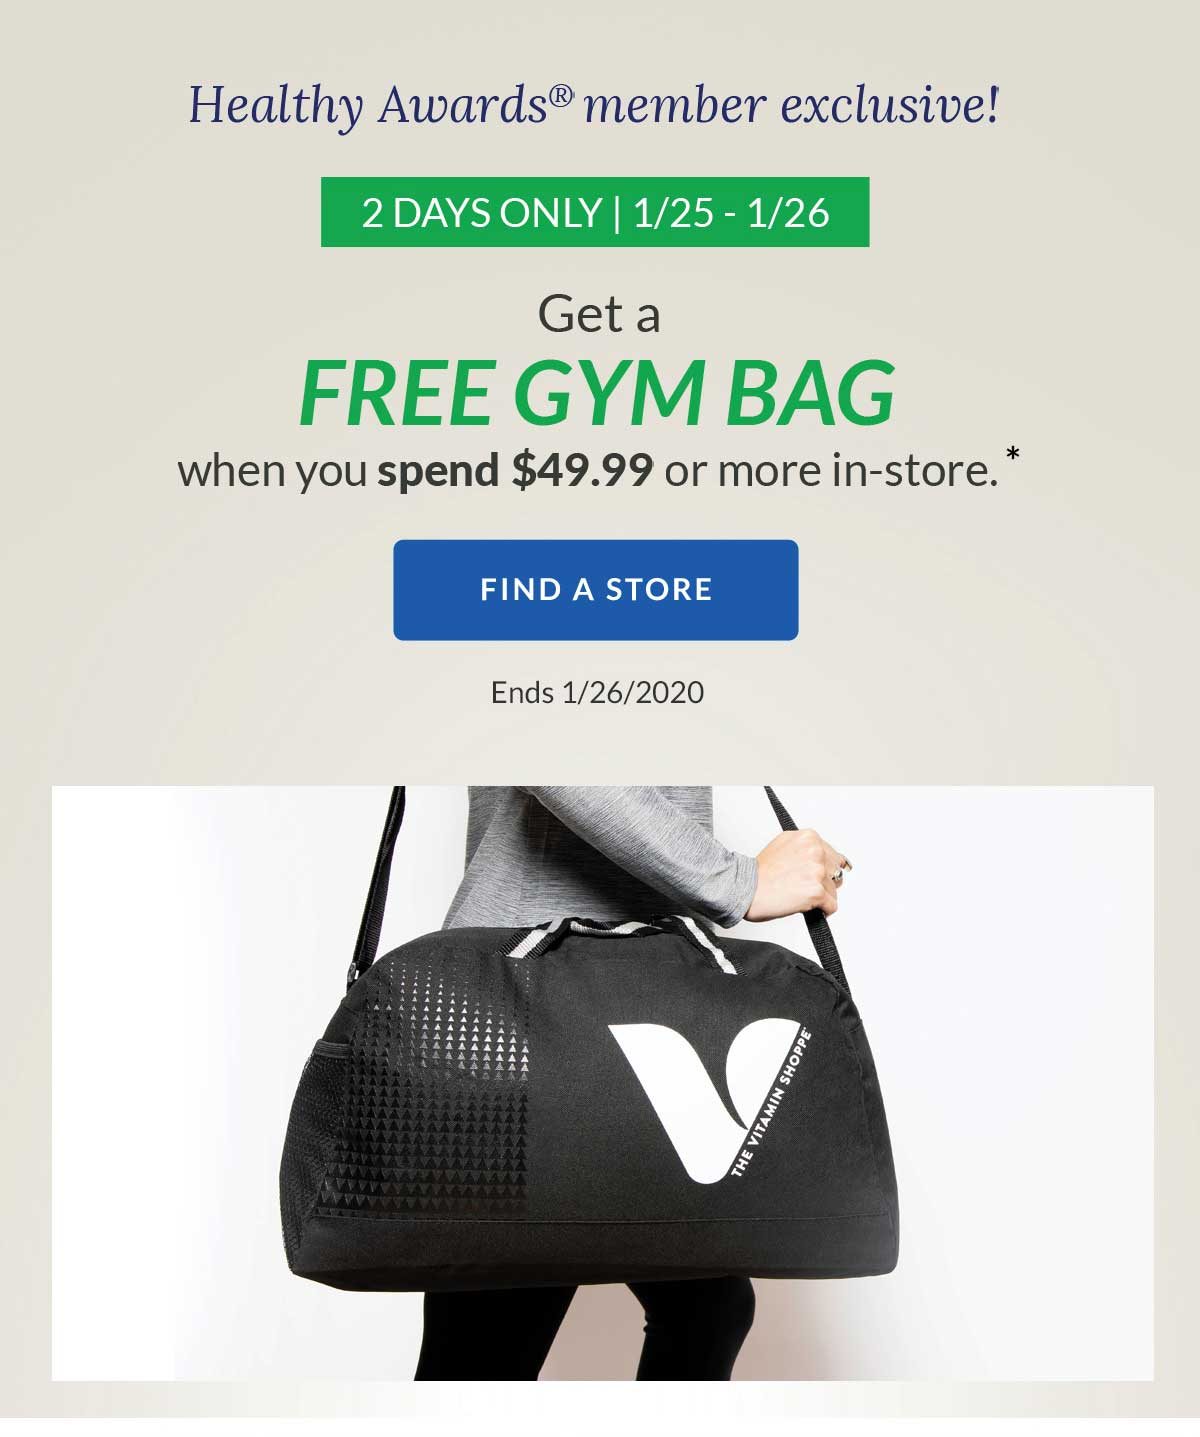 healthy awards member exclusive! | 2 days only | 1/25 - 1/26 | get a free gym bag when you spend 49.99 or more in-store. | find a store | ends 1/26/2020